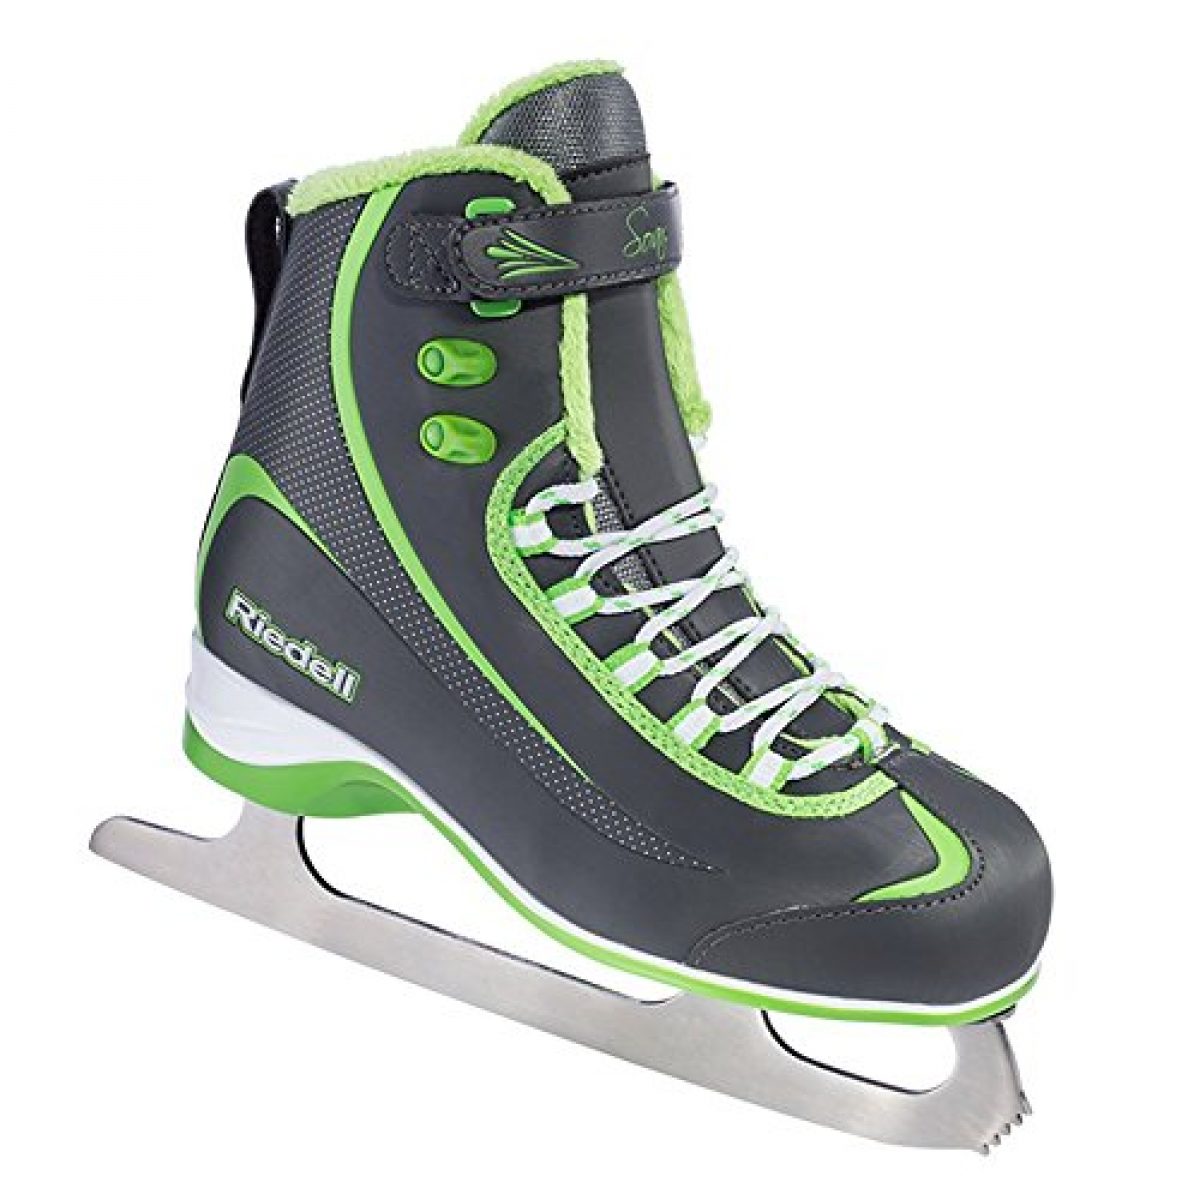 Ice Skating Best Offer ⋆ Ice Skating Best Deals at OutdoorFull.com